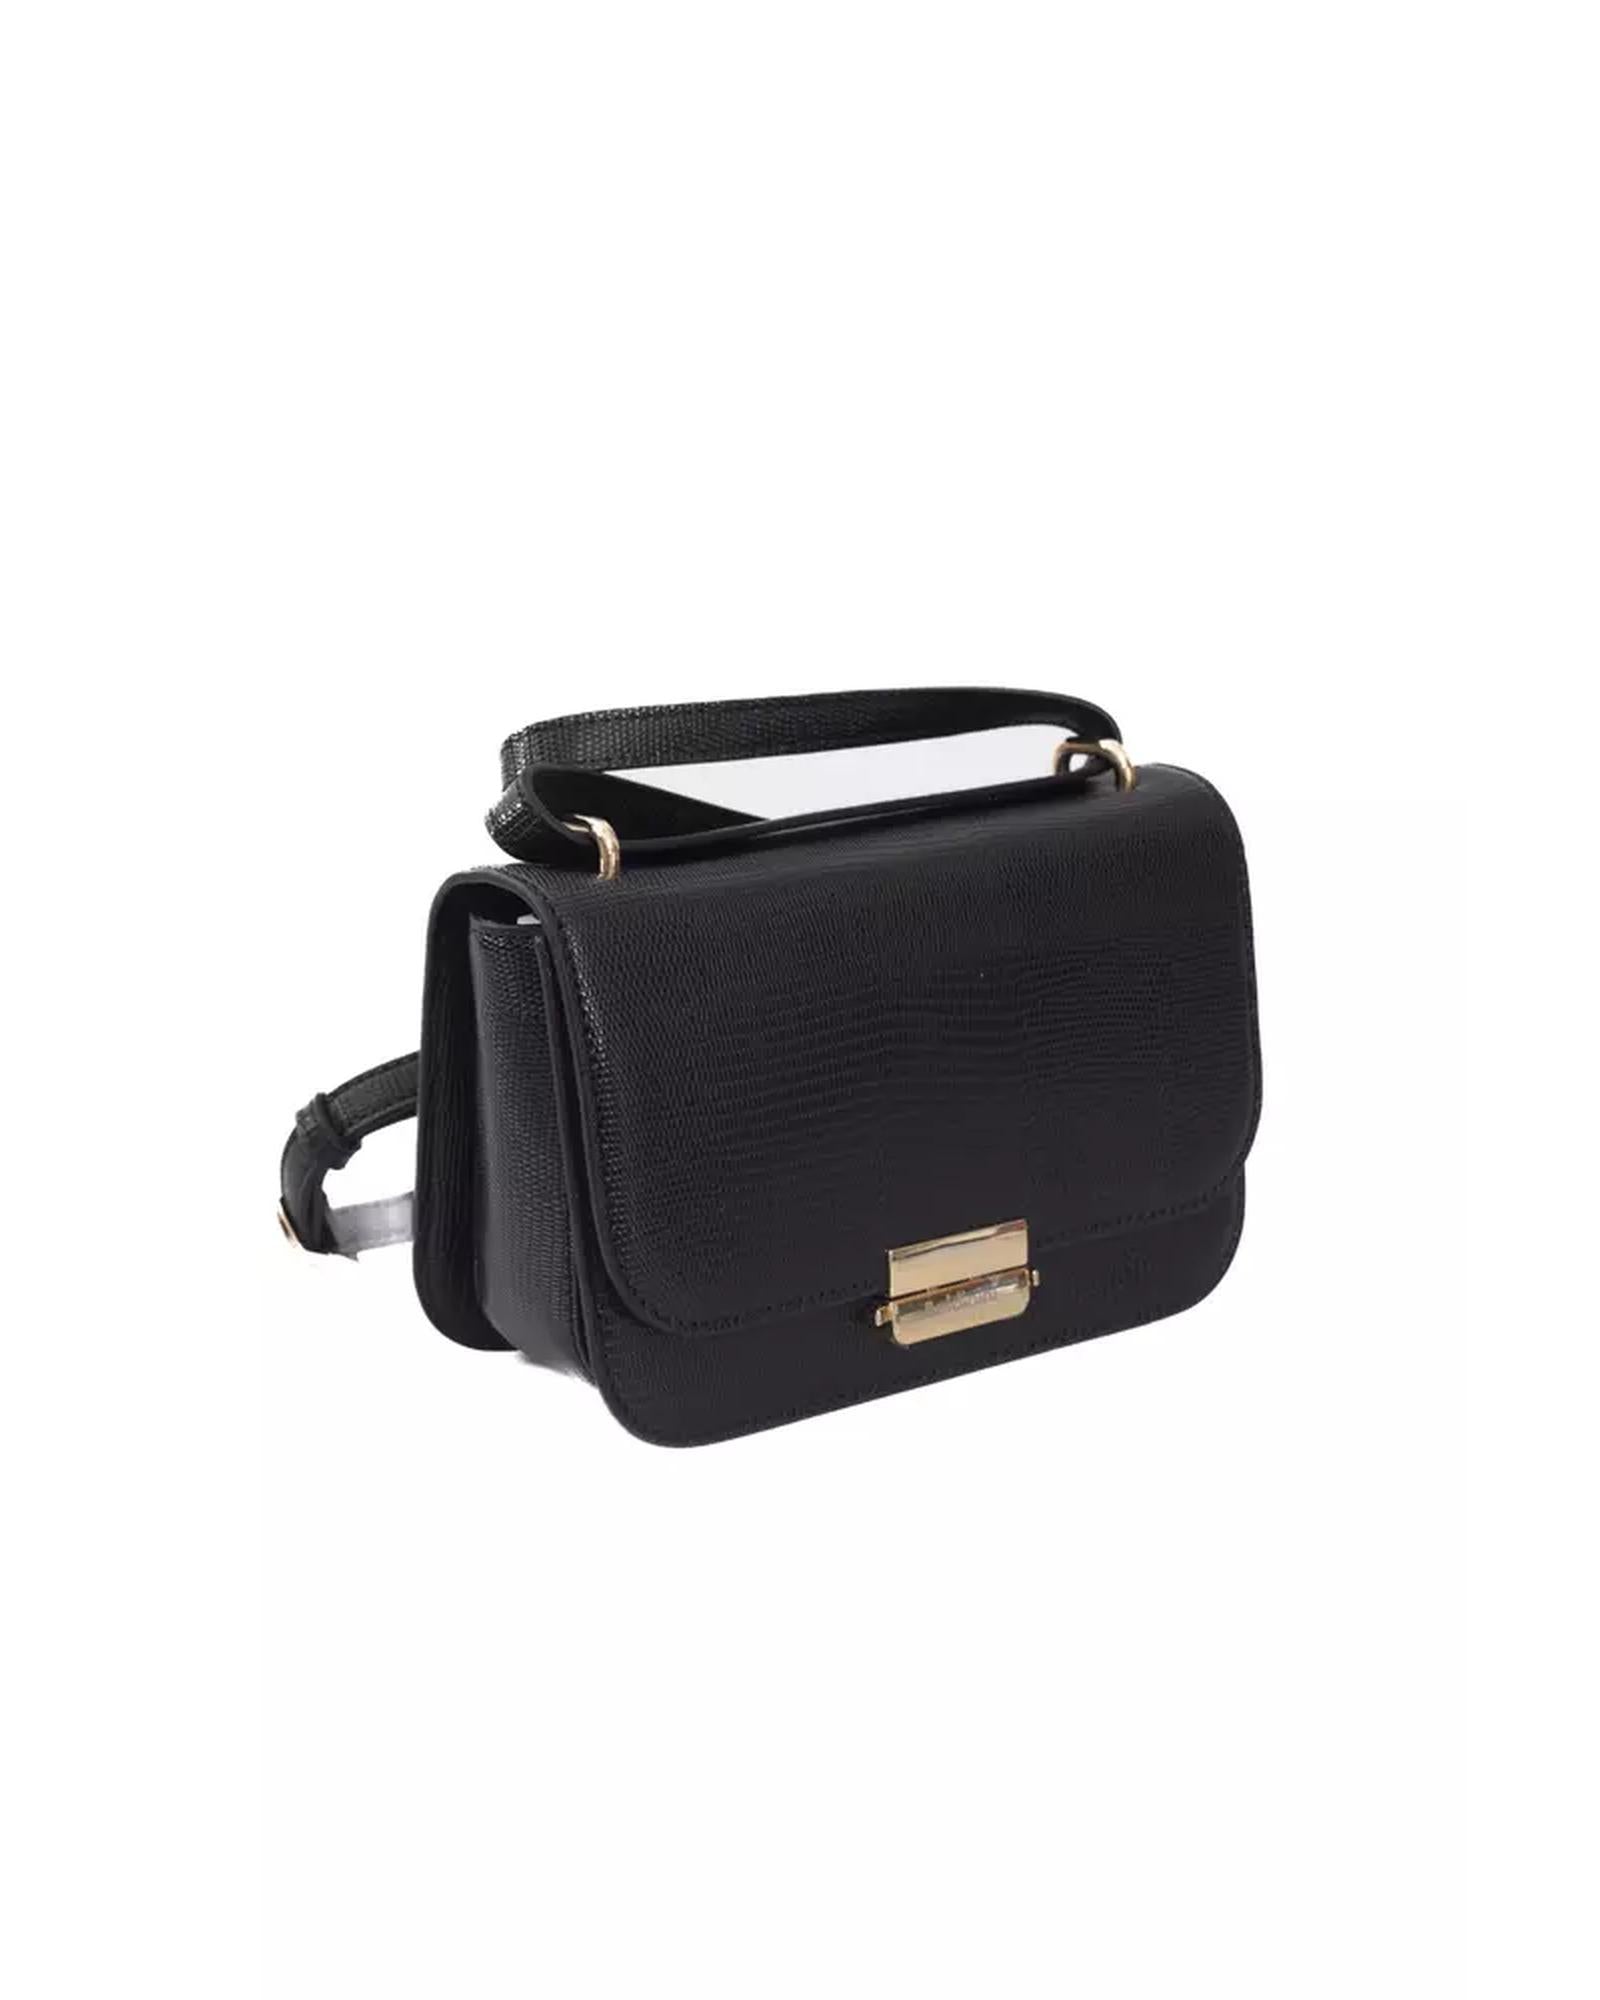 Golden Logoed Shoulder Bag with Internal Compartments and Front Logo One Size Women